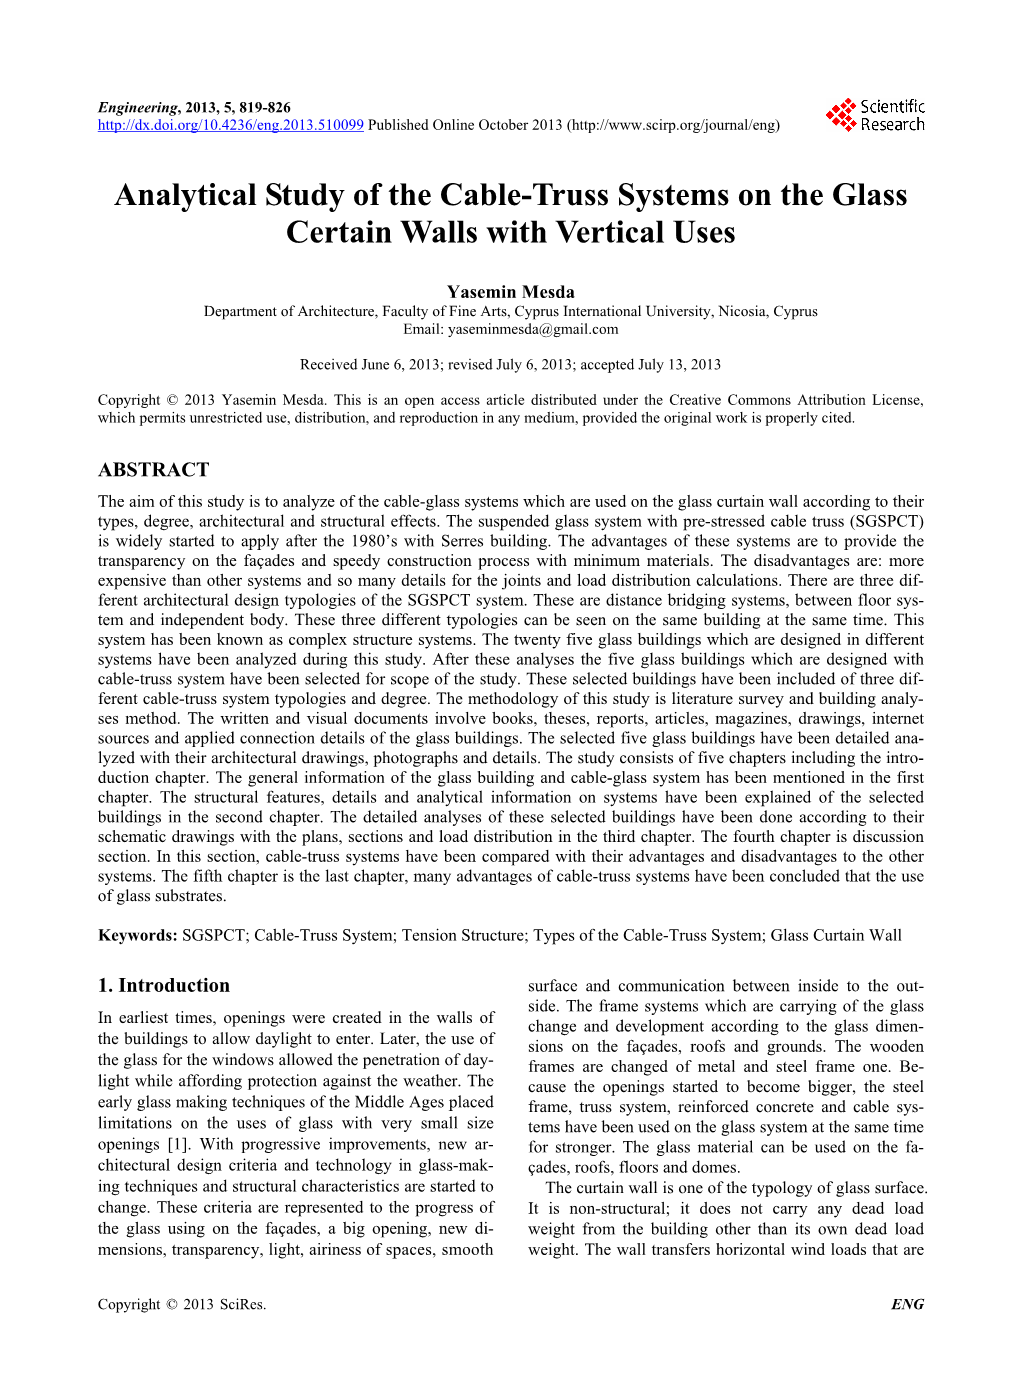 Analytical Study of the Cable-Truss Systems on the Glass Certain Walls with Vertical Uses